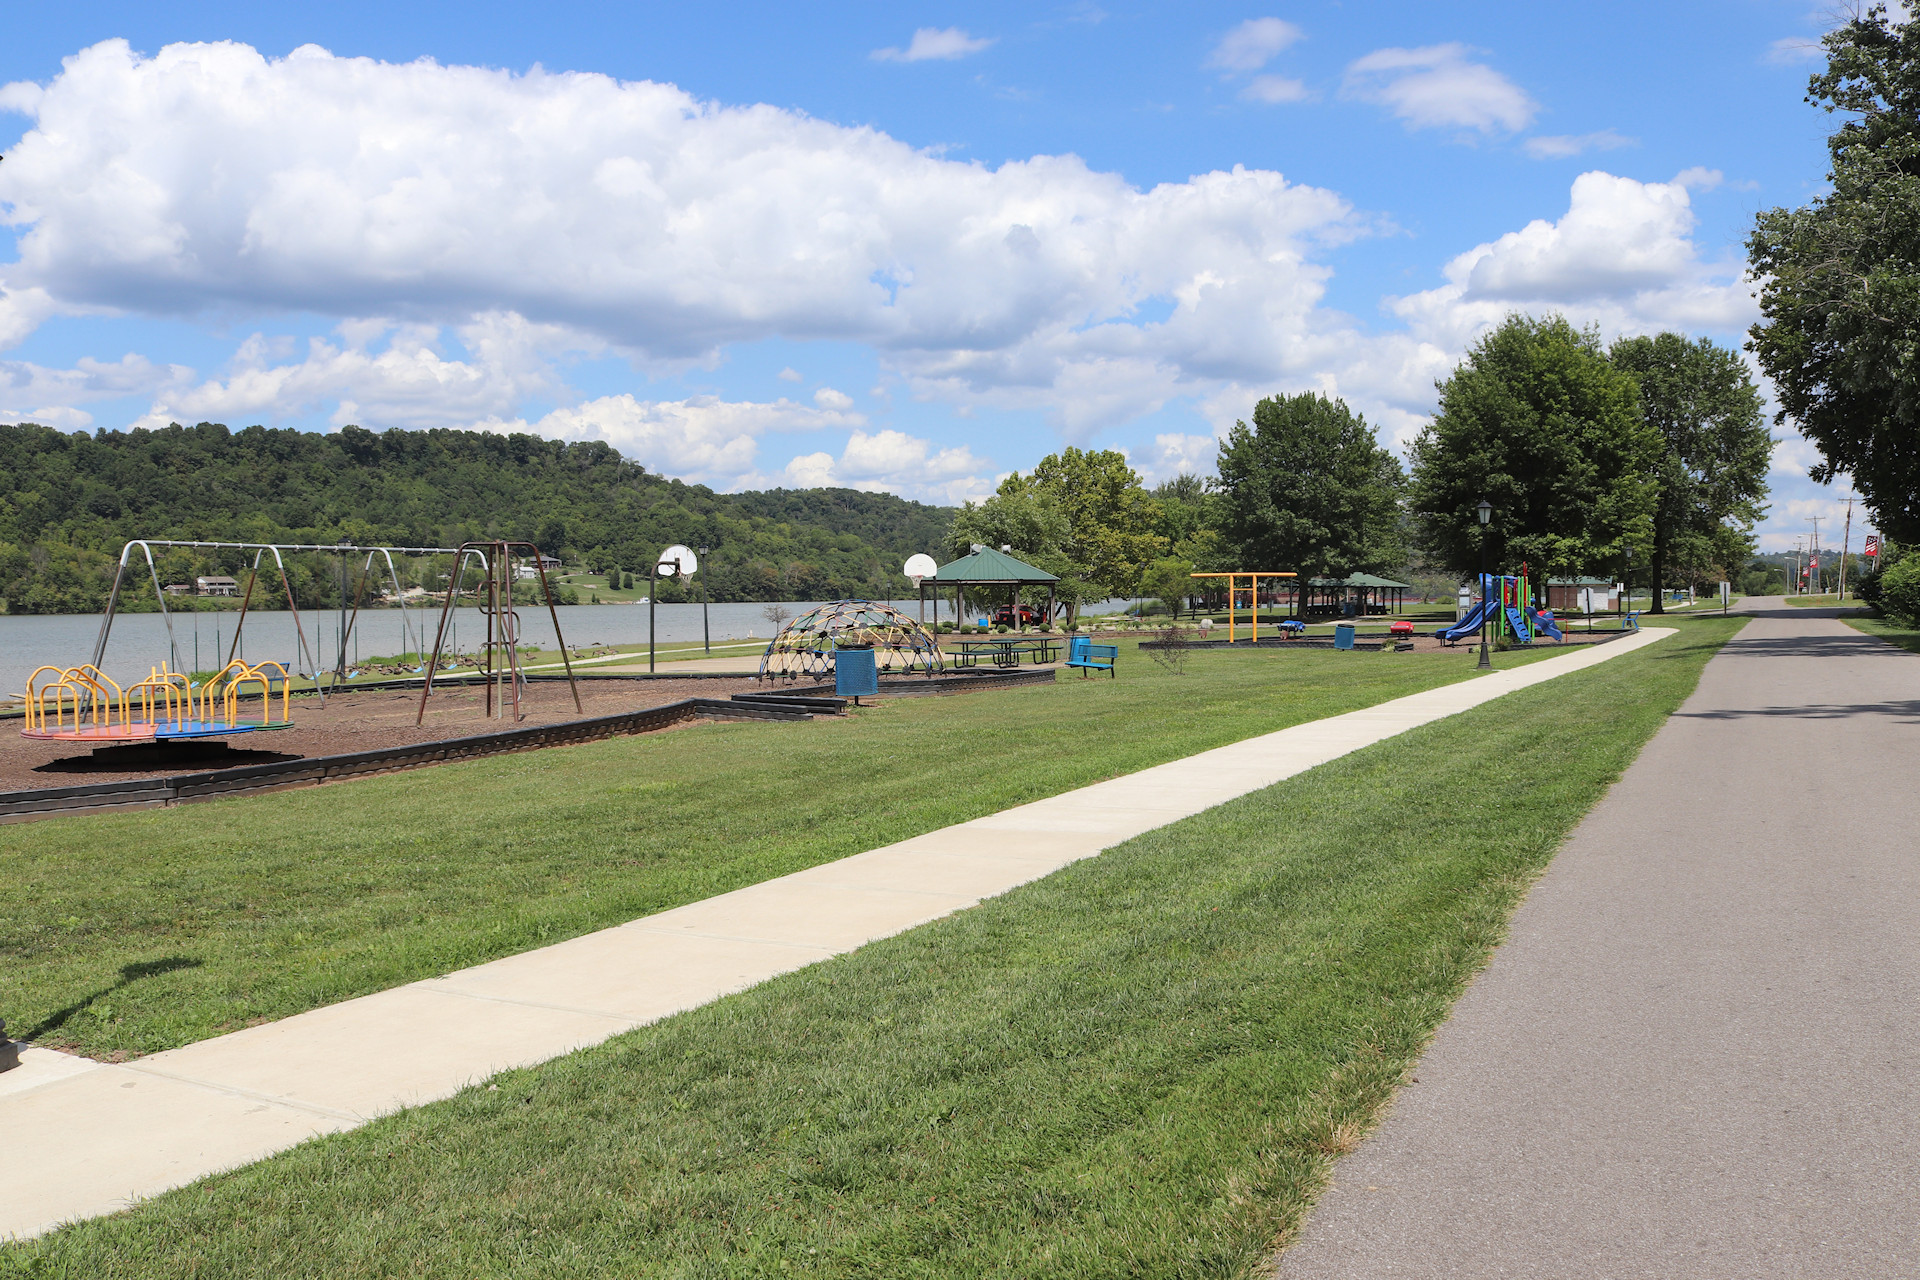 Warsaw Riverfront Park in Gallatin County, Kentucky